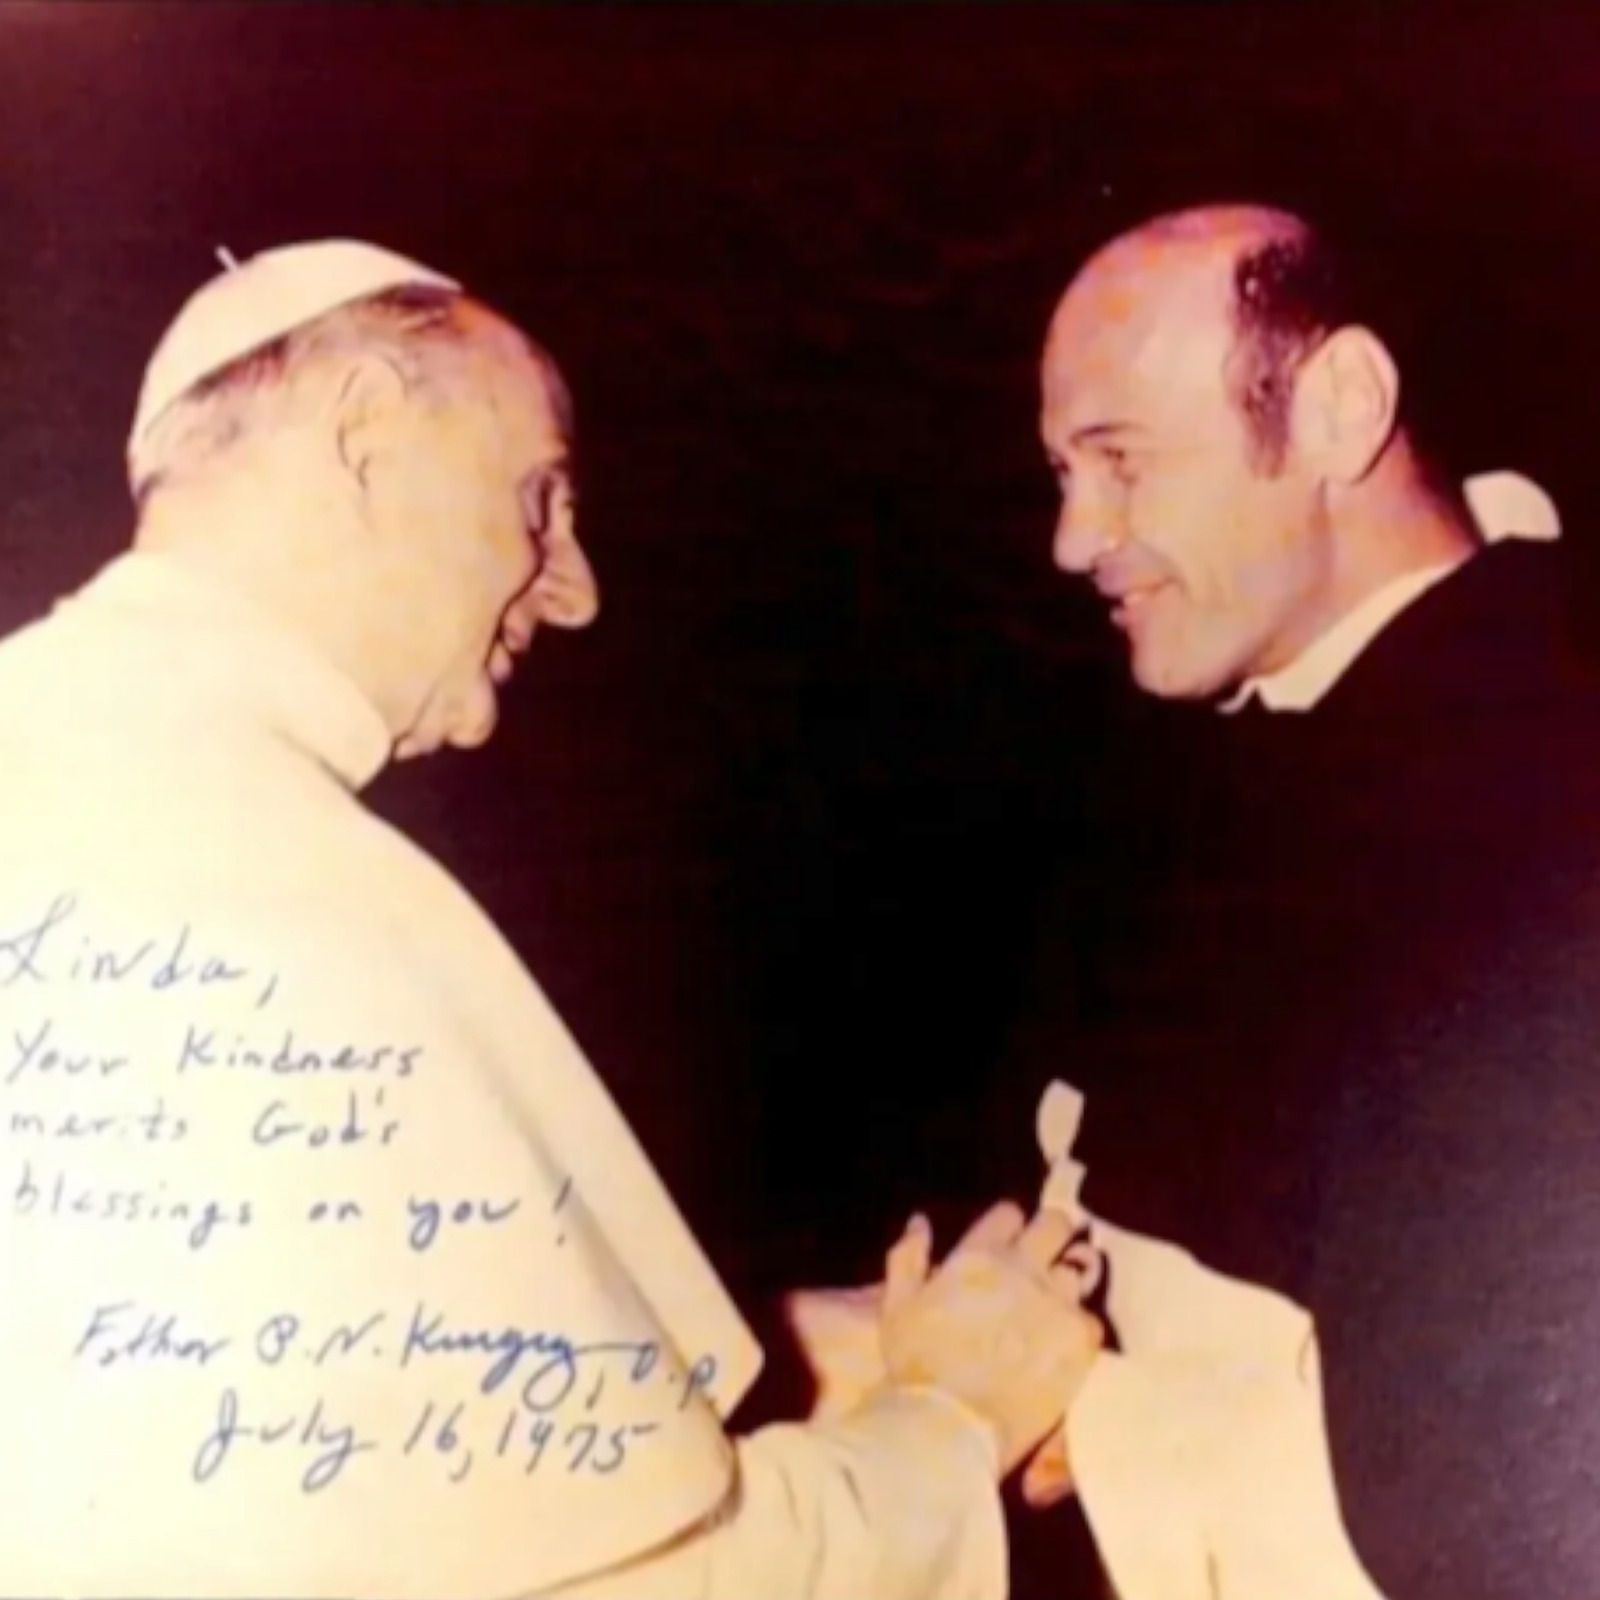 Pope Paul VI Photograph with Priest PN Kingley 1975 Catholic Clergy Press 10 In